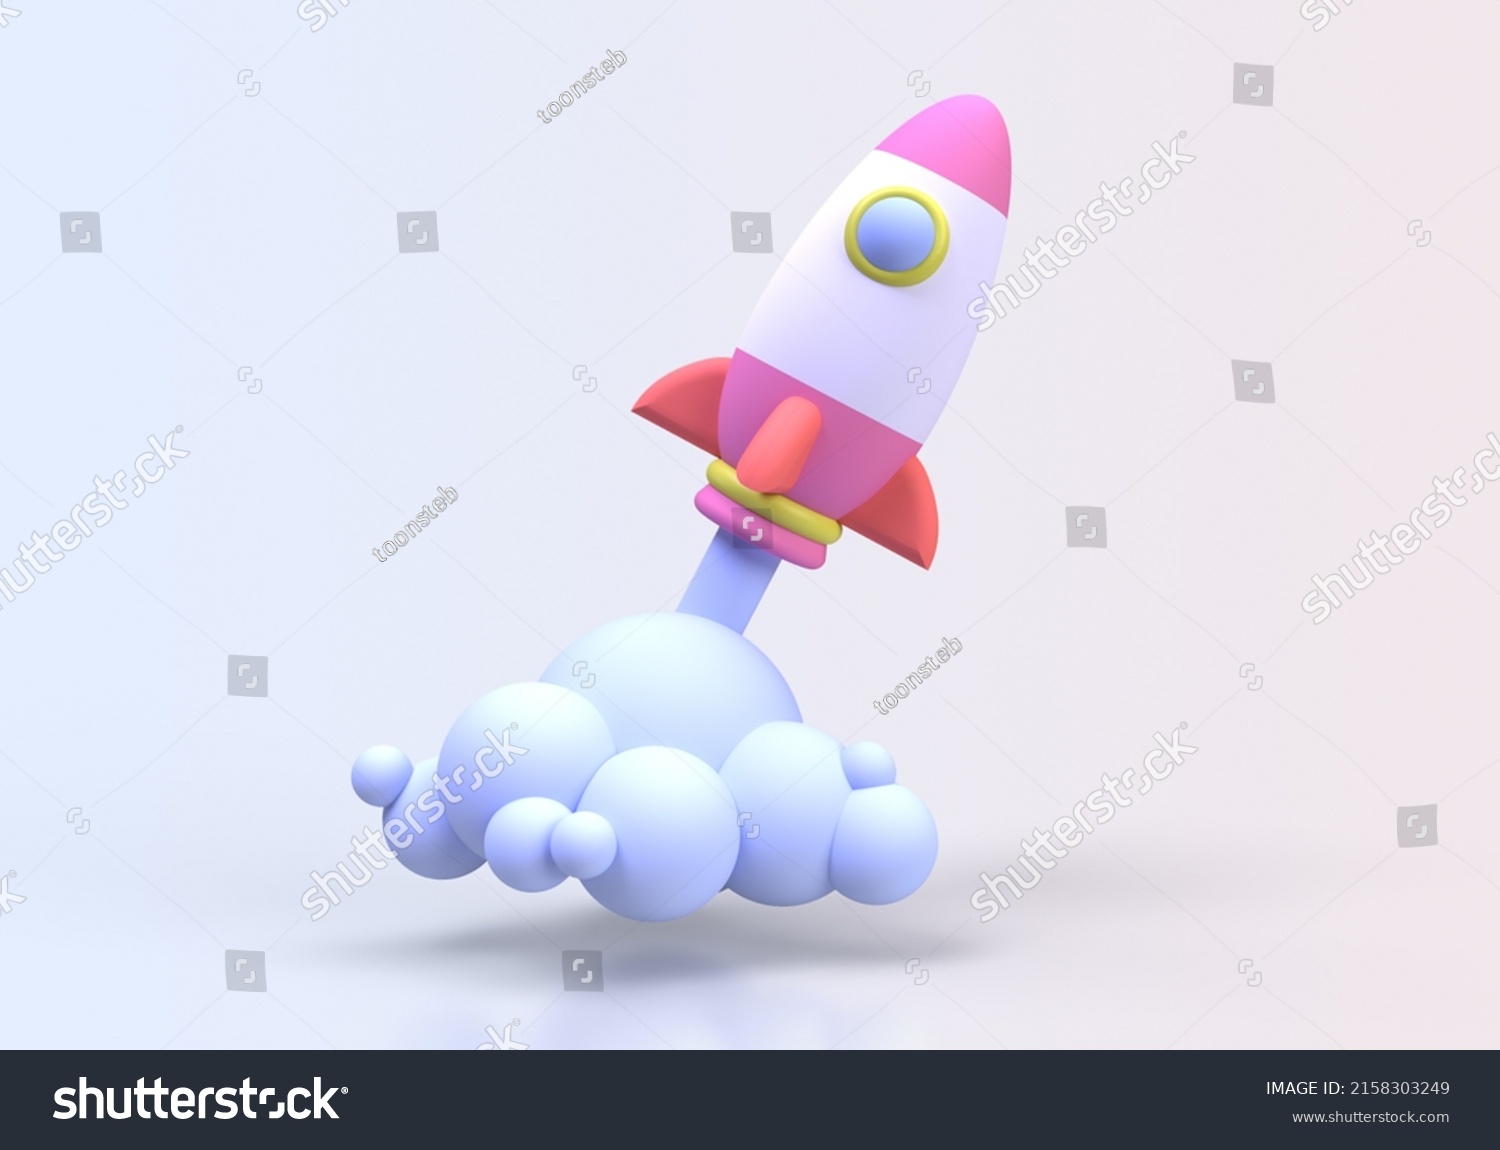 Rocket Launches Space Ship Concept Illustration Stock Illustration